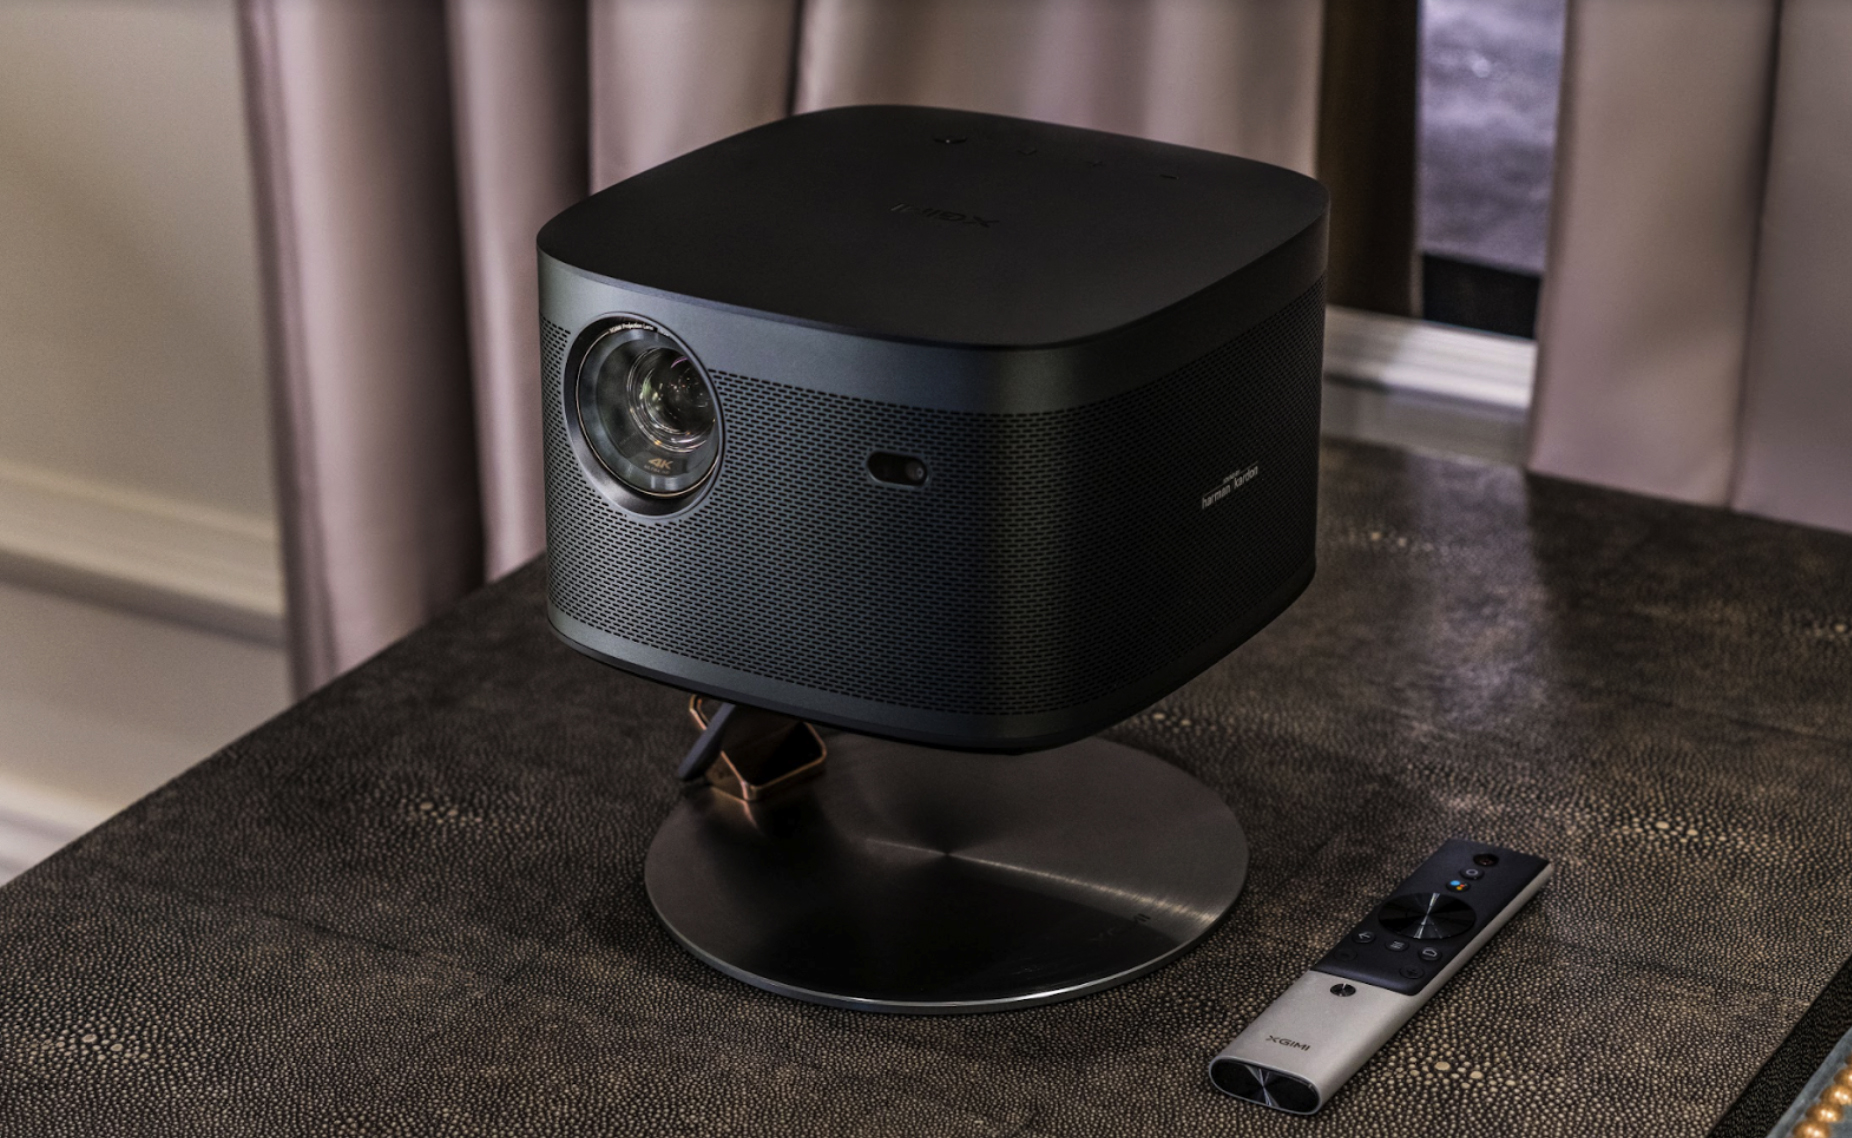 XGIMI Horizon Pro review: The best 4K projector you've never